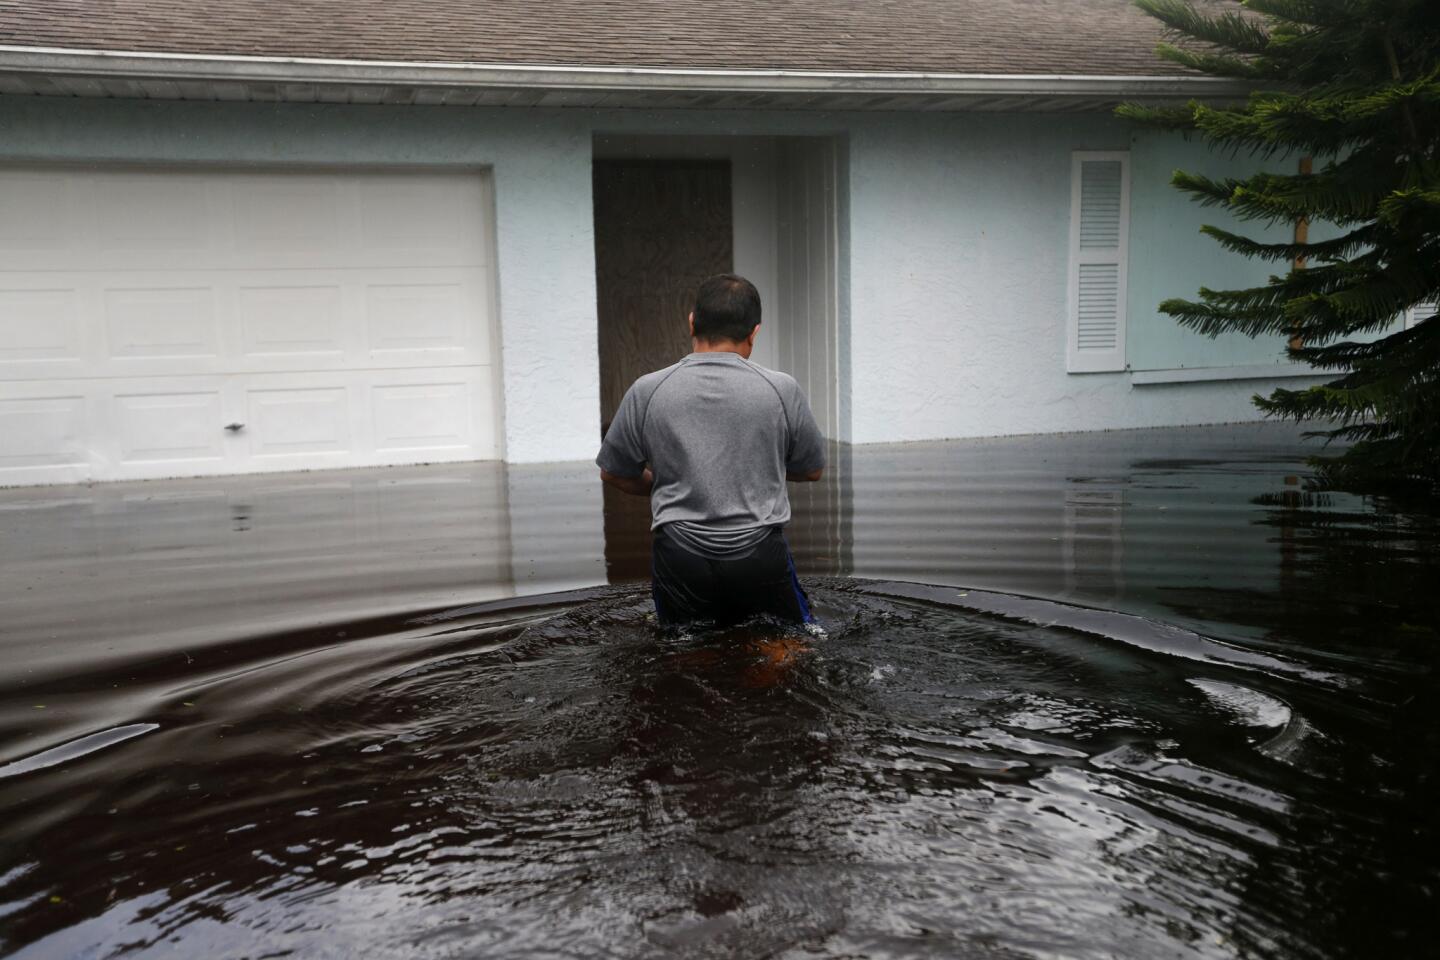 A man returns to his flooded home in the aftermath of Hurricane Irma in Bonita Springs, Fla., on Sept. 11, 2017.